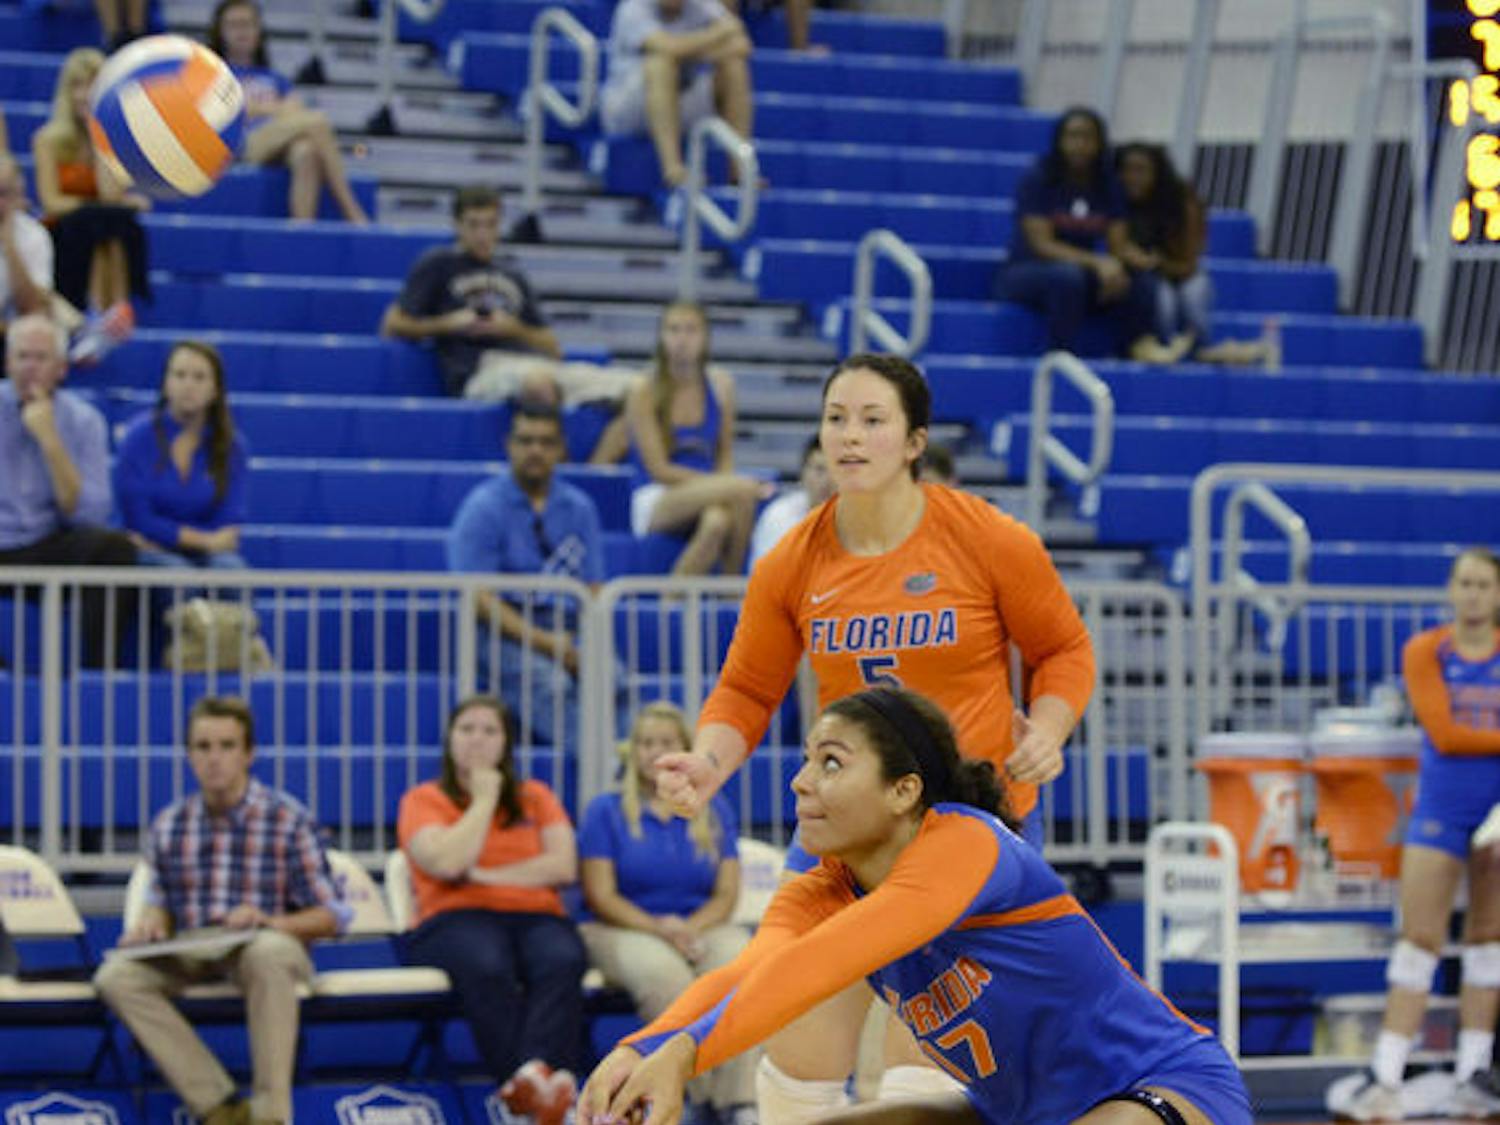 Sophomore outside hitter Noami Santos-Lamb (17) squats to bump the ball during Florida’s 3-0 victory against New Orleans on Friday in the O’Connell Center. Florida won all three of its weekend matches.